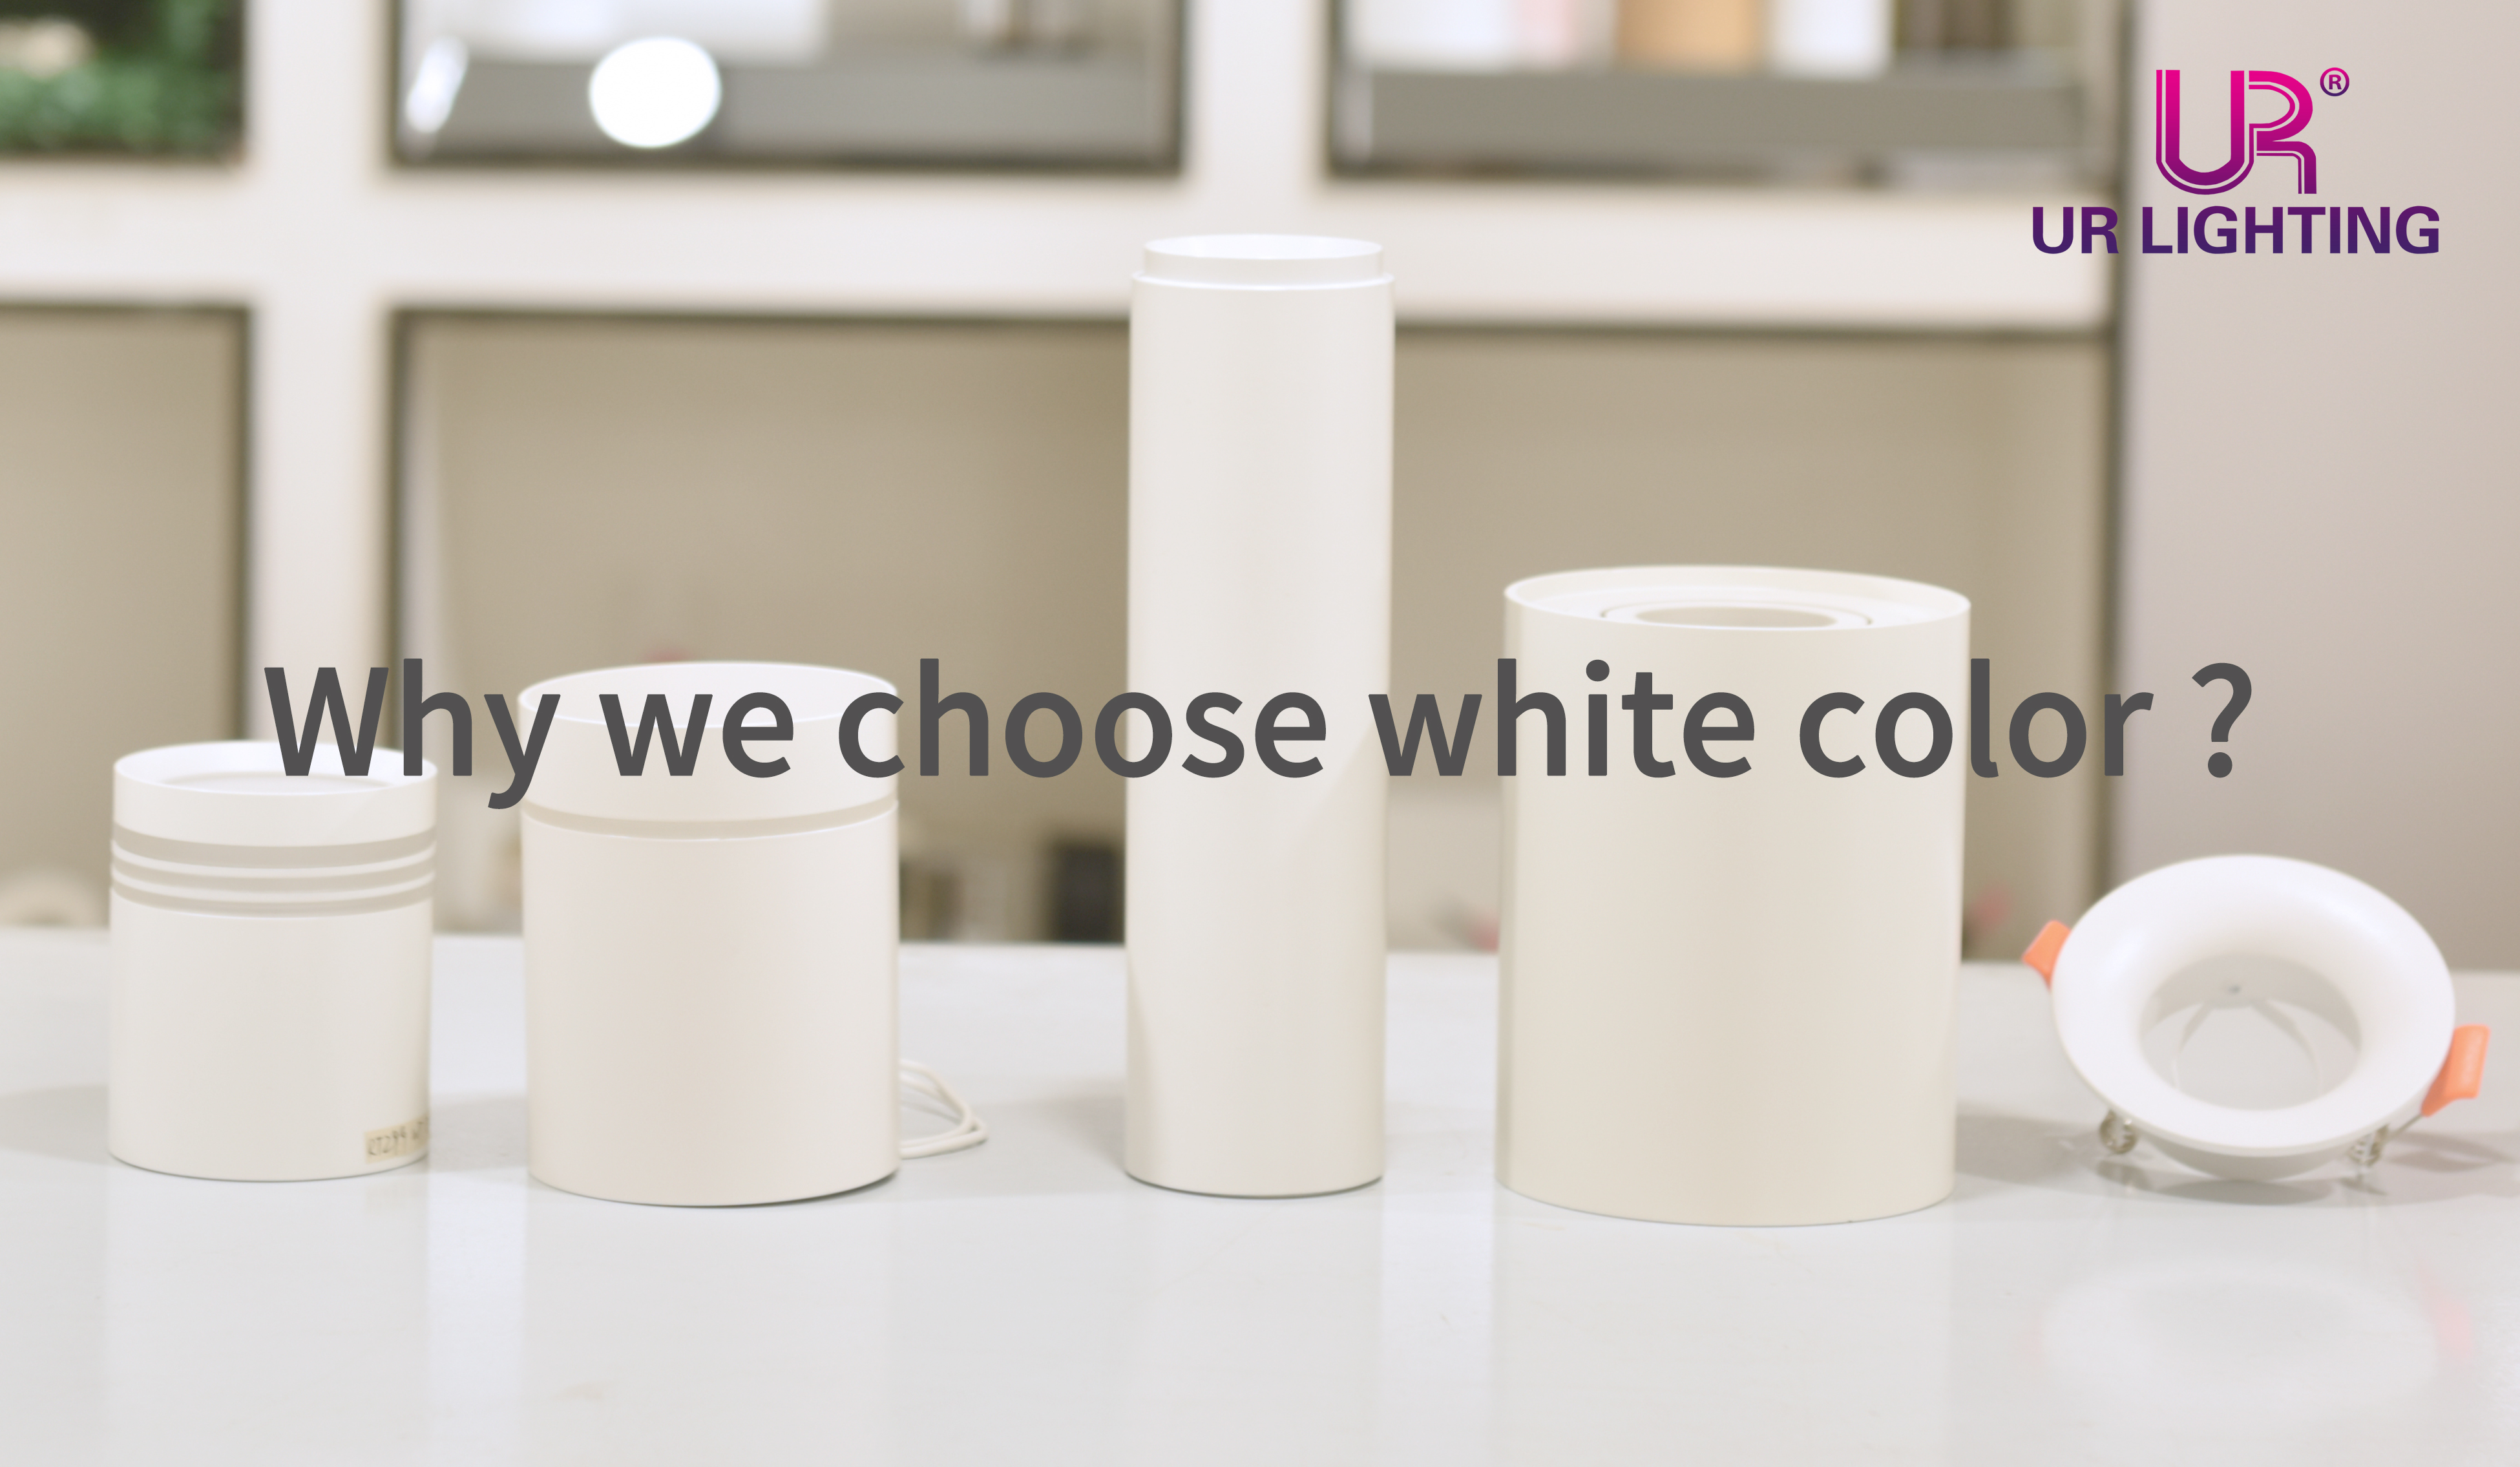 Why we choose white color？